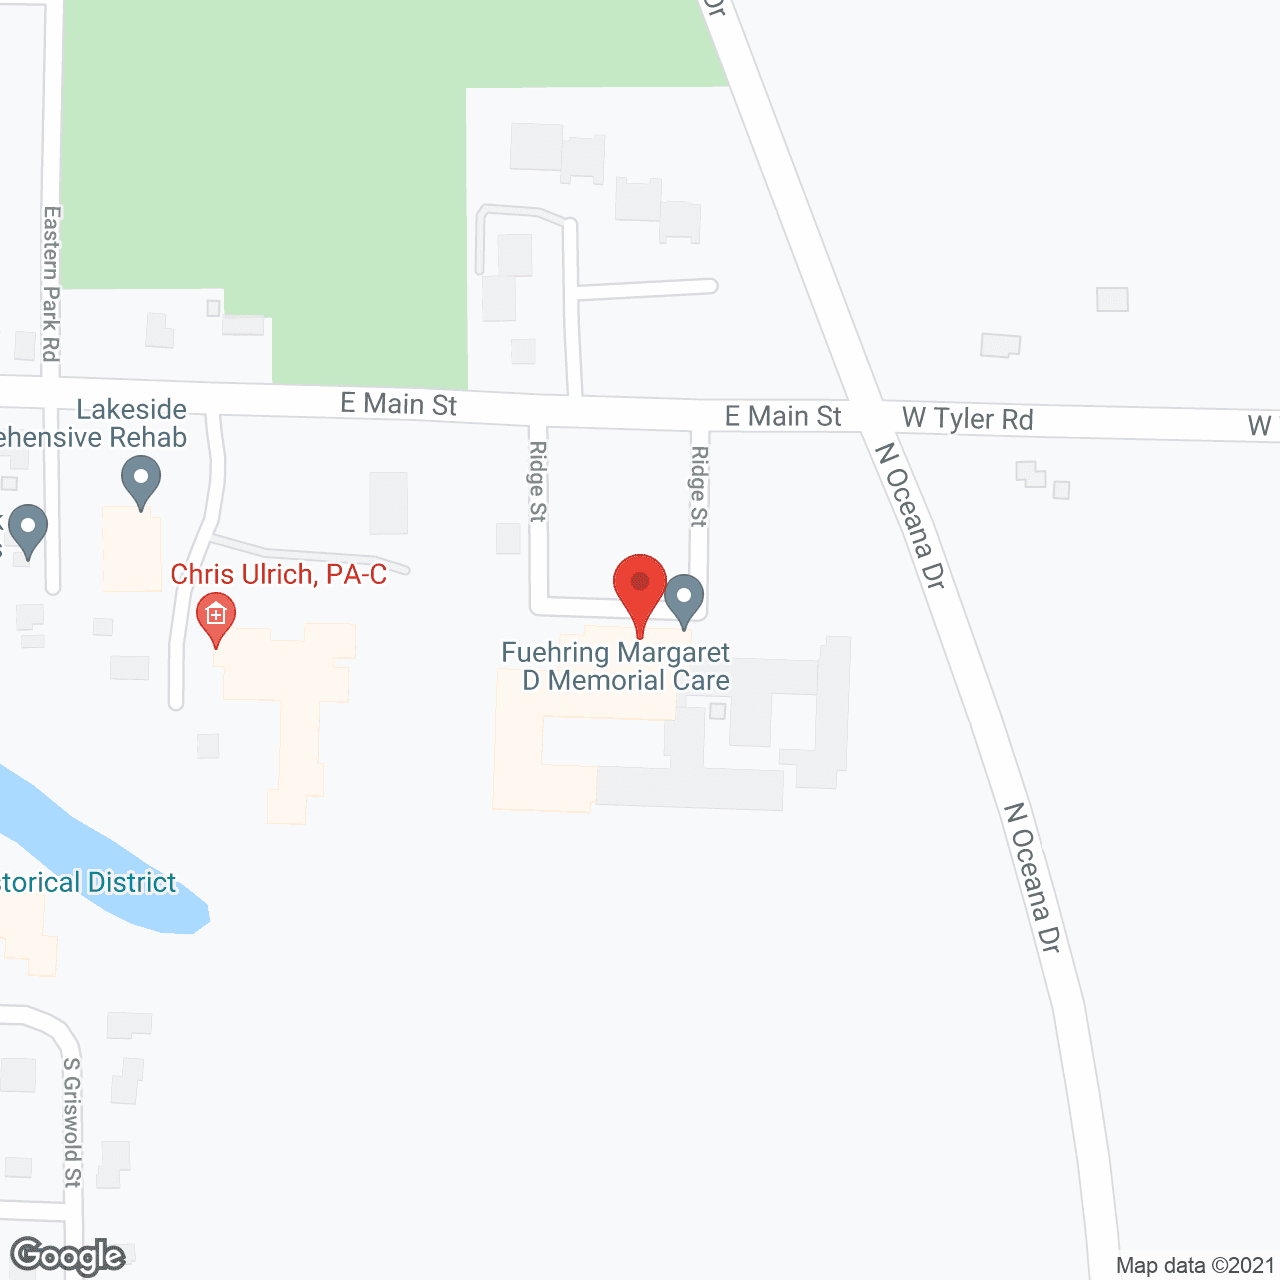 Oceana County Medical Care in google map